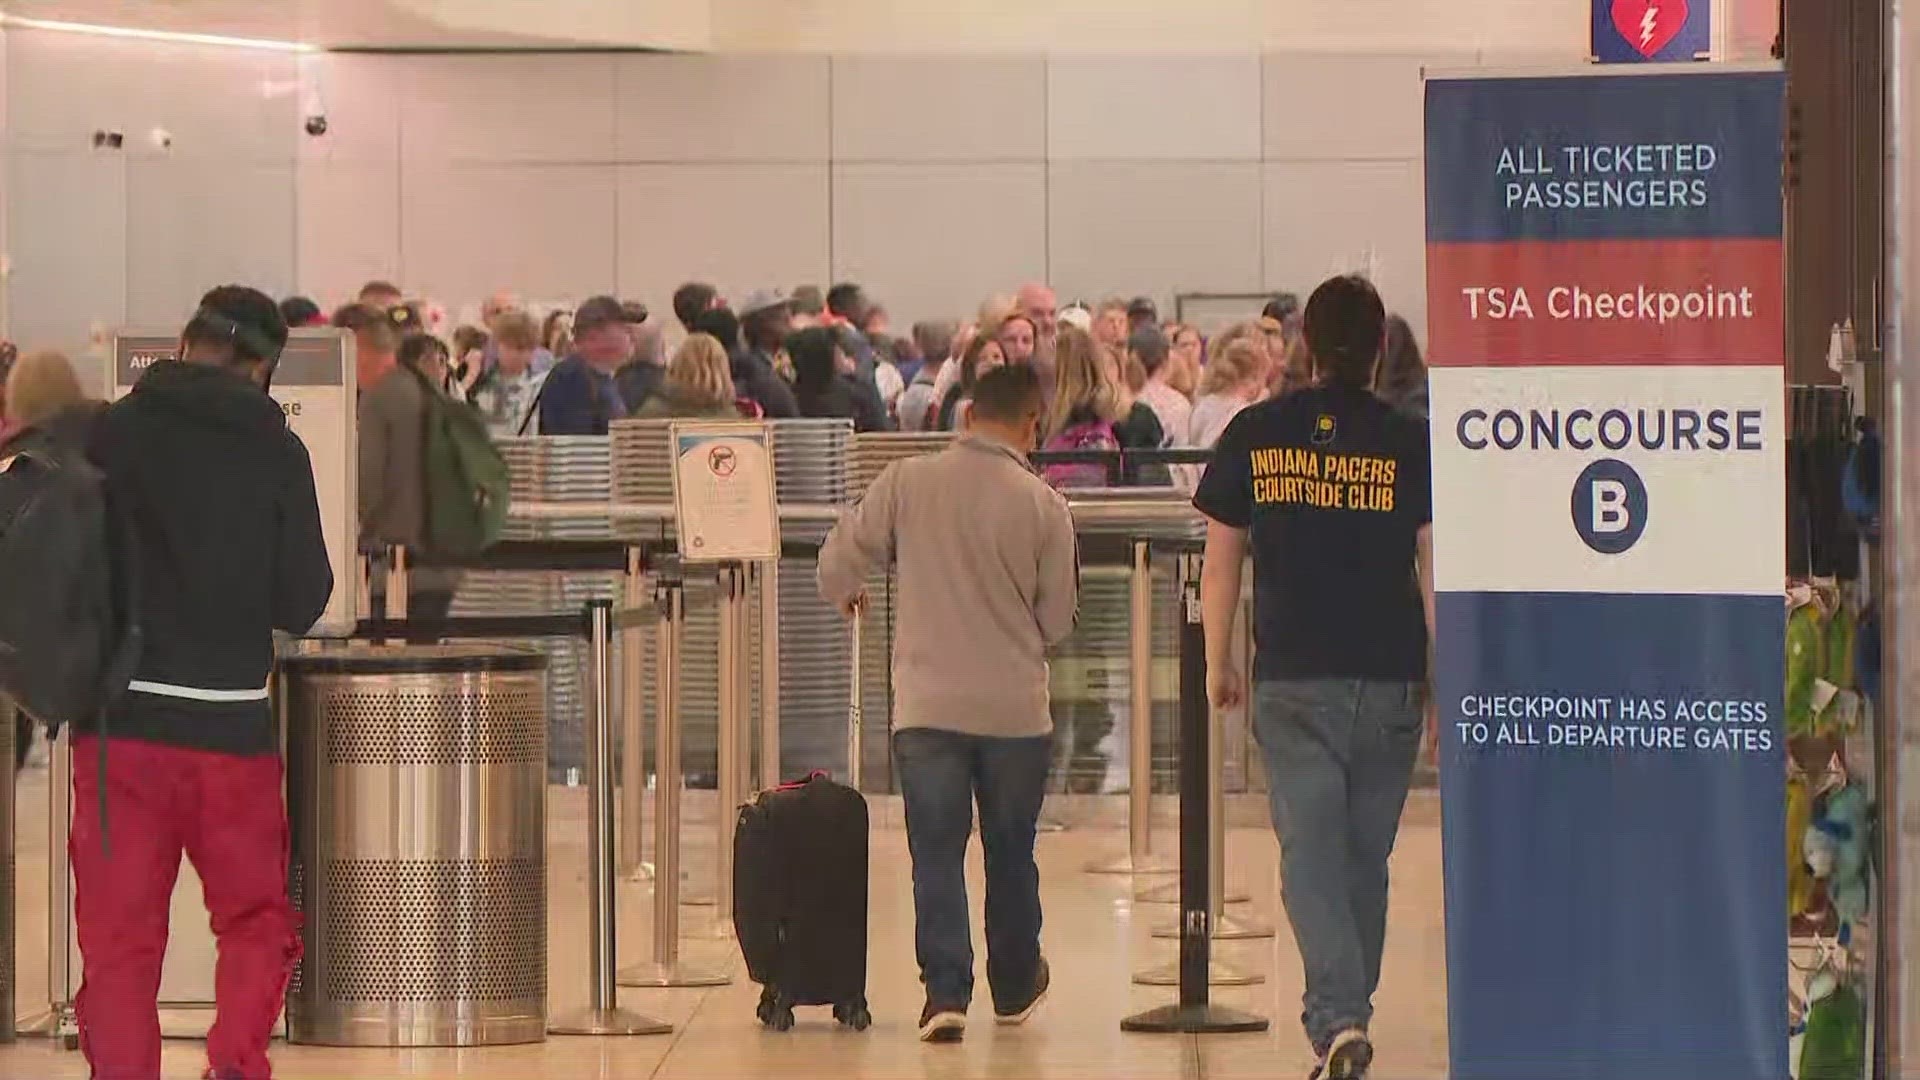 TSA officials expect about 19 thousand people a day to go through security for departing flights out of Indianapolis between October 5th and the 9th.